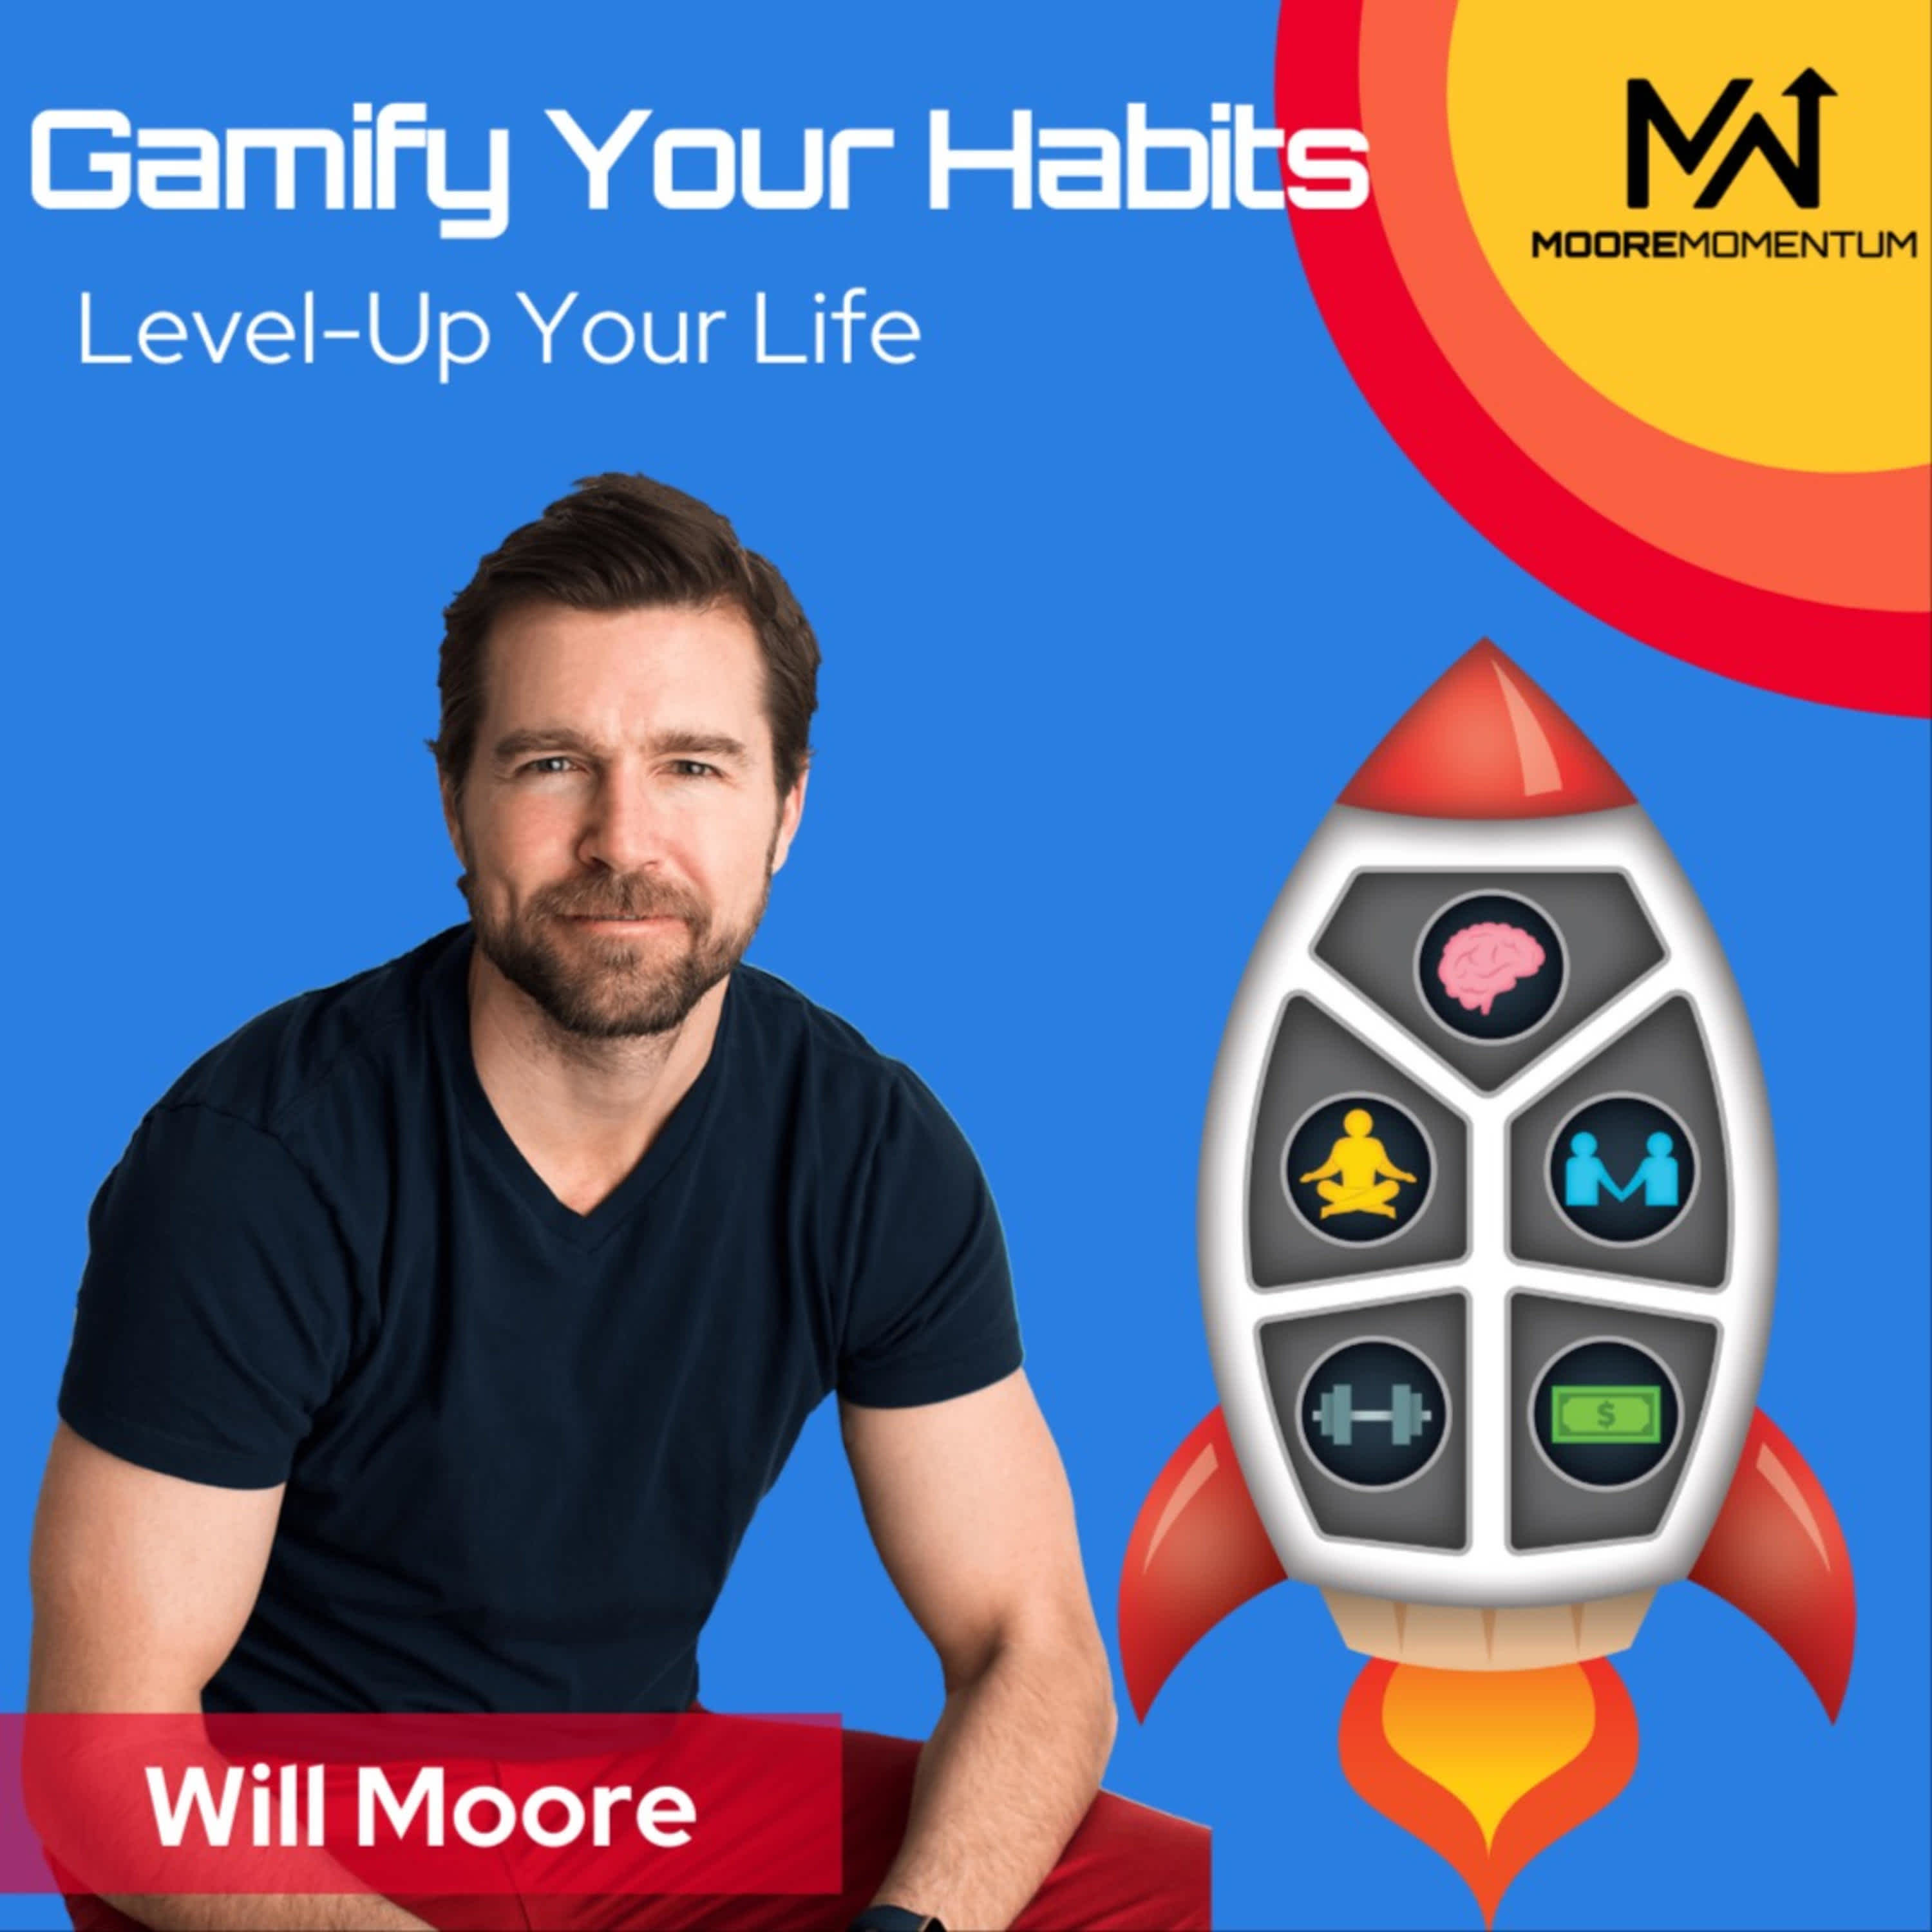 Gaining momentum and happiness revolves around your ability to continually grow in, and maintain a holistic balance in all 5 Core areas of your life to your happiness